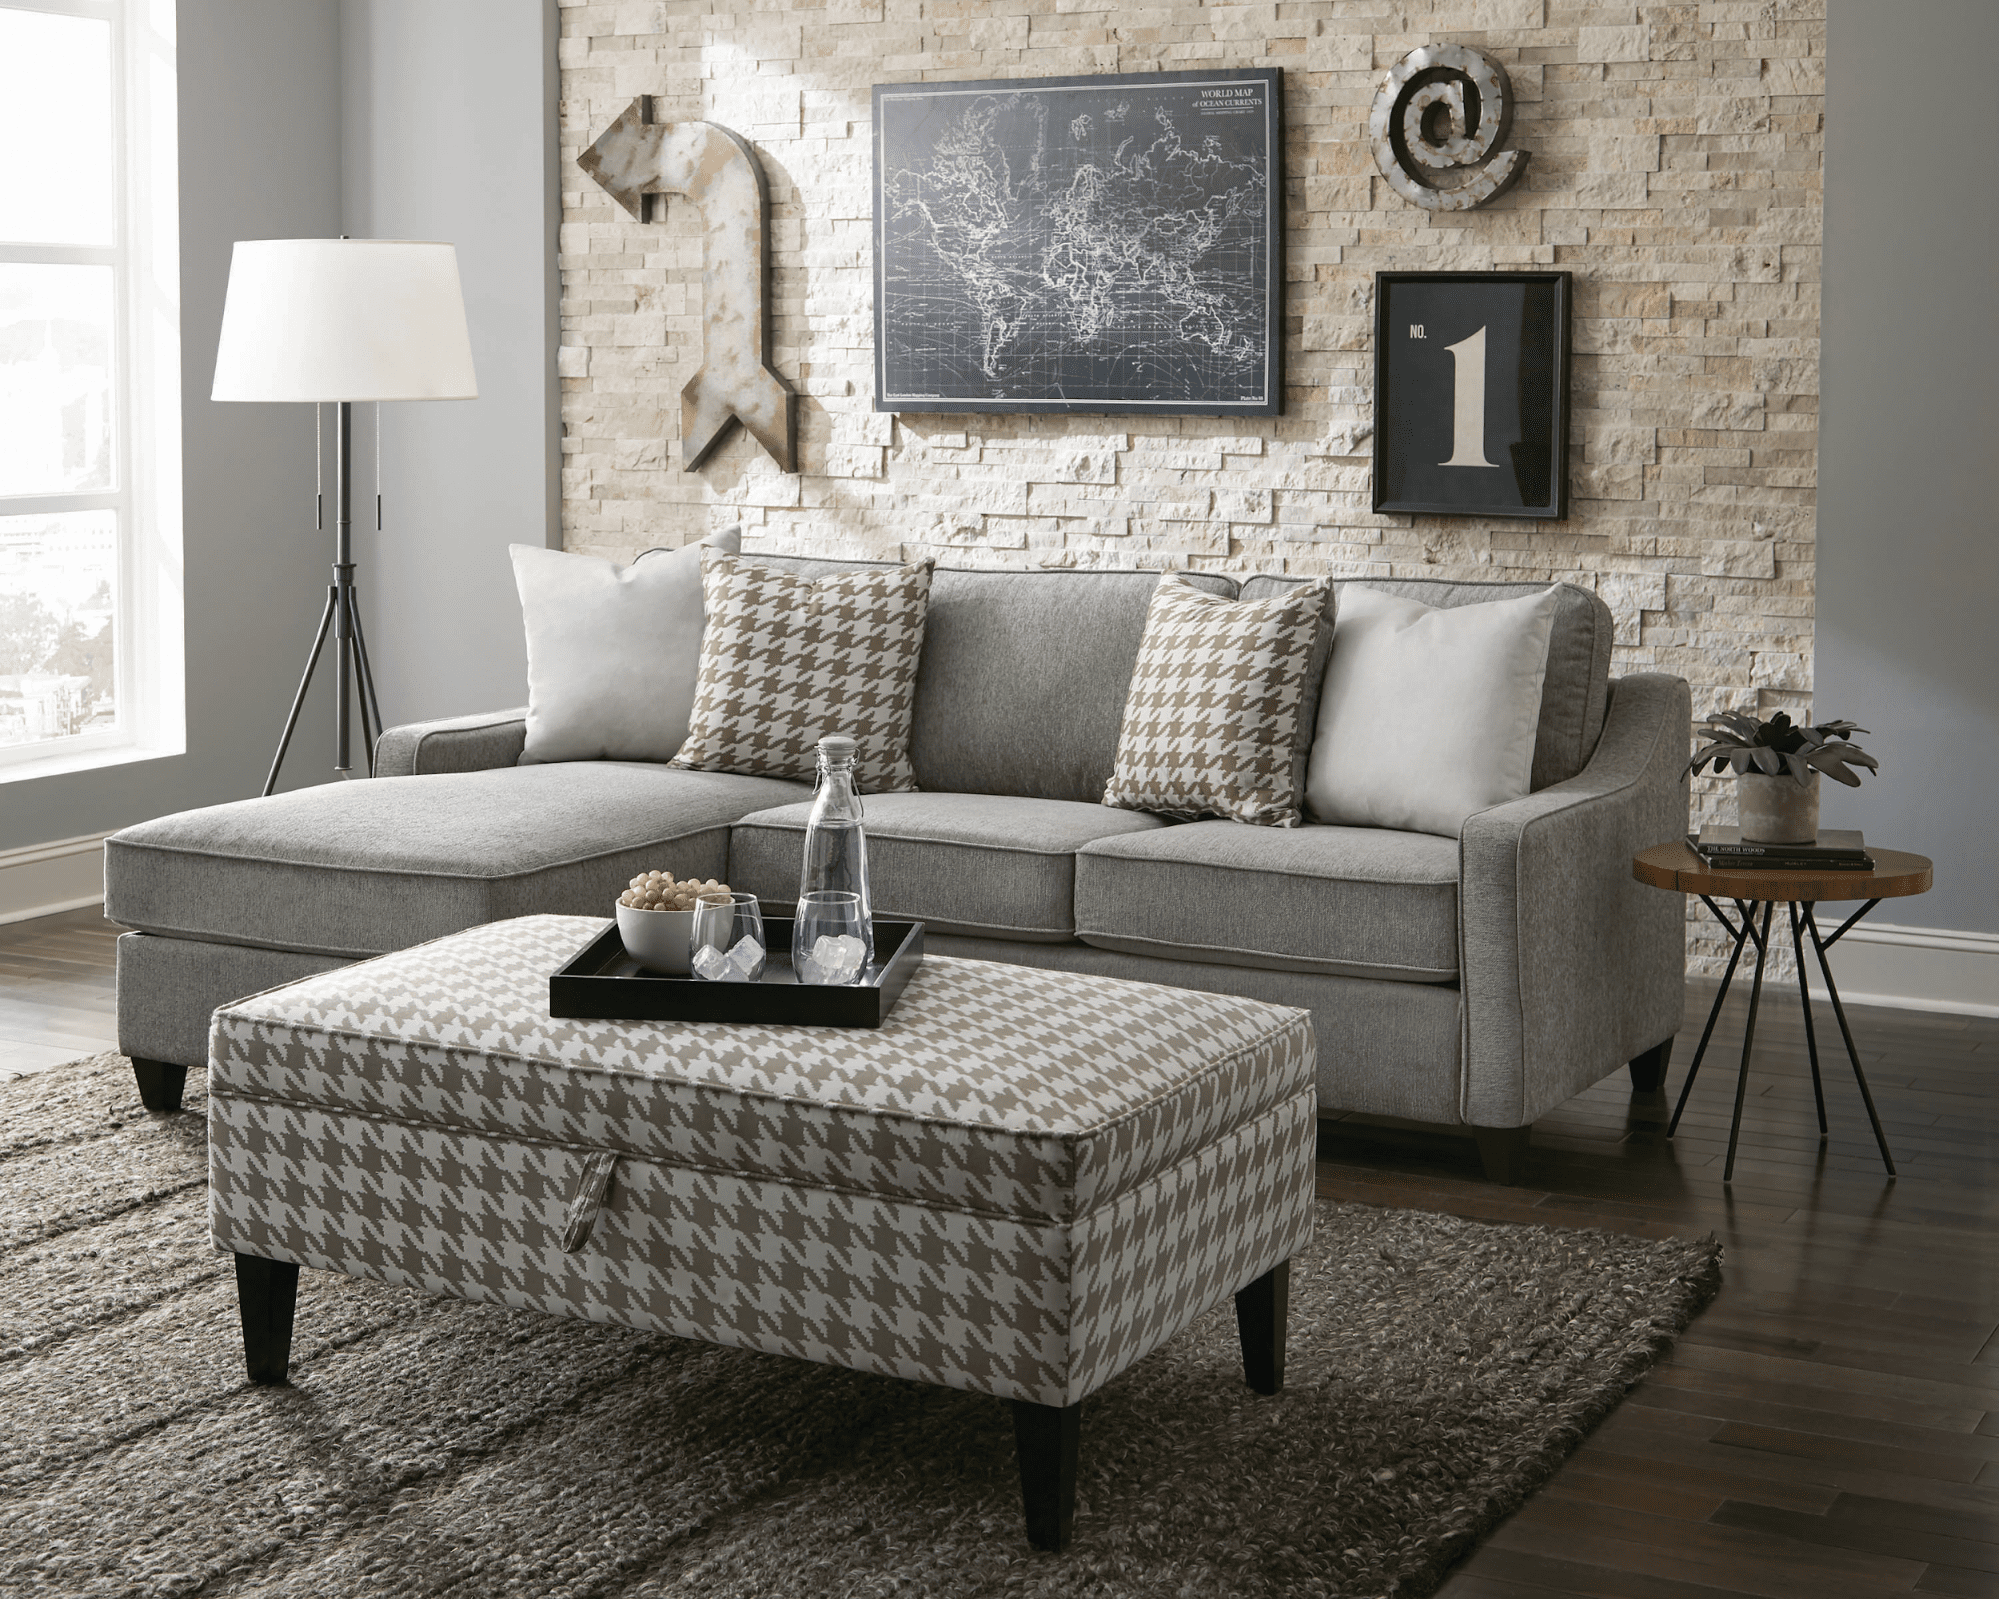 How To Pick A Small Sectional Sofa For A Small Space – Coast Pertaining To Sofas For Small Spaces (View 8 of 15)